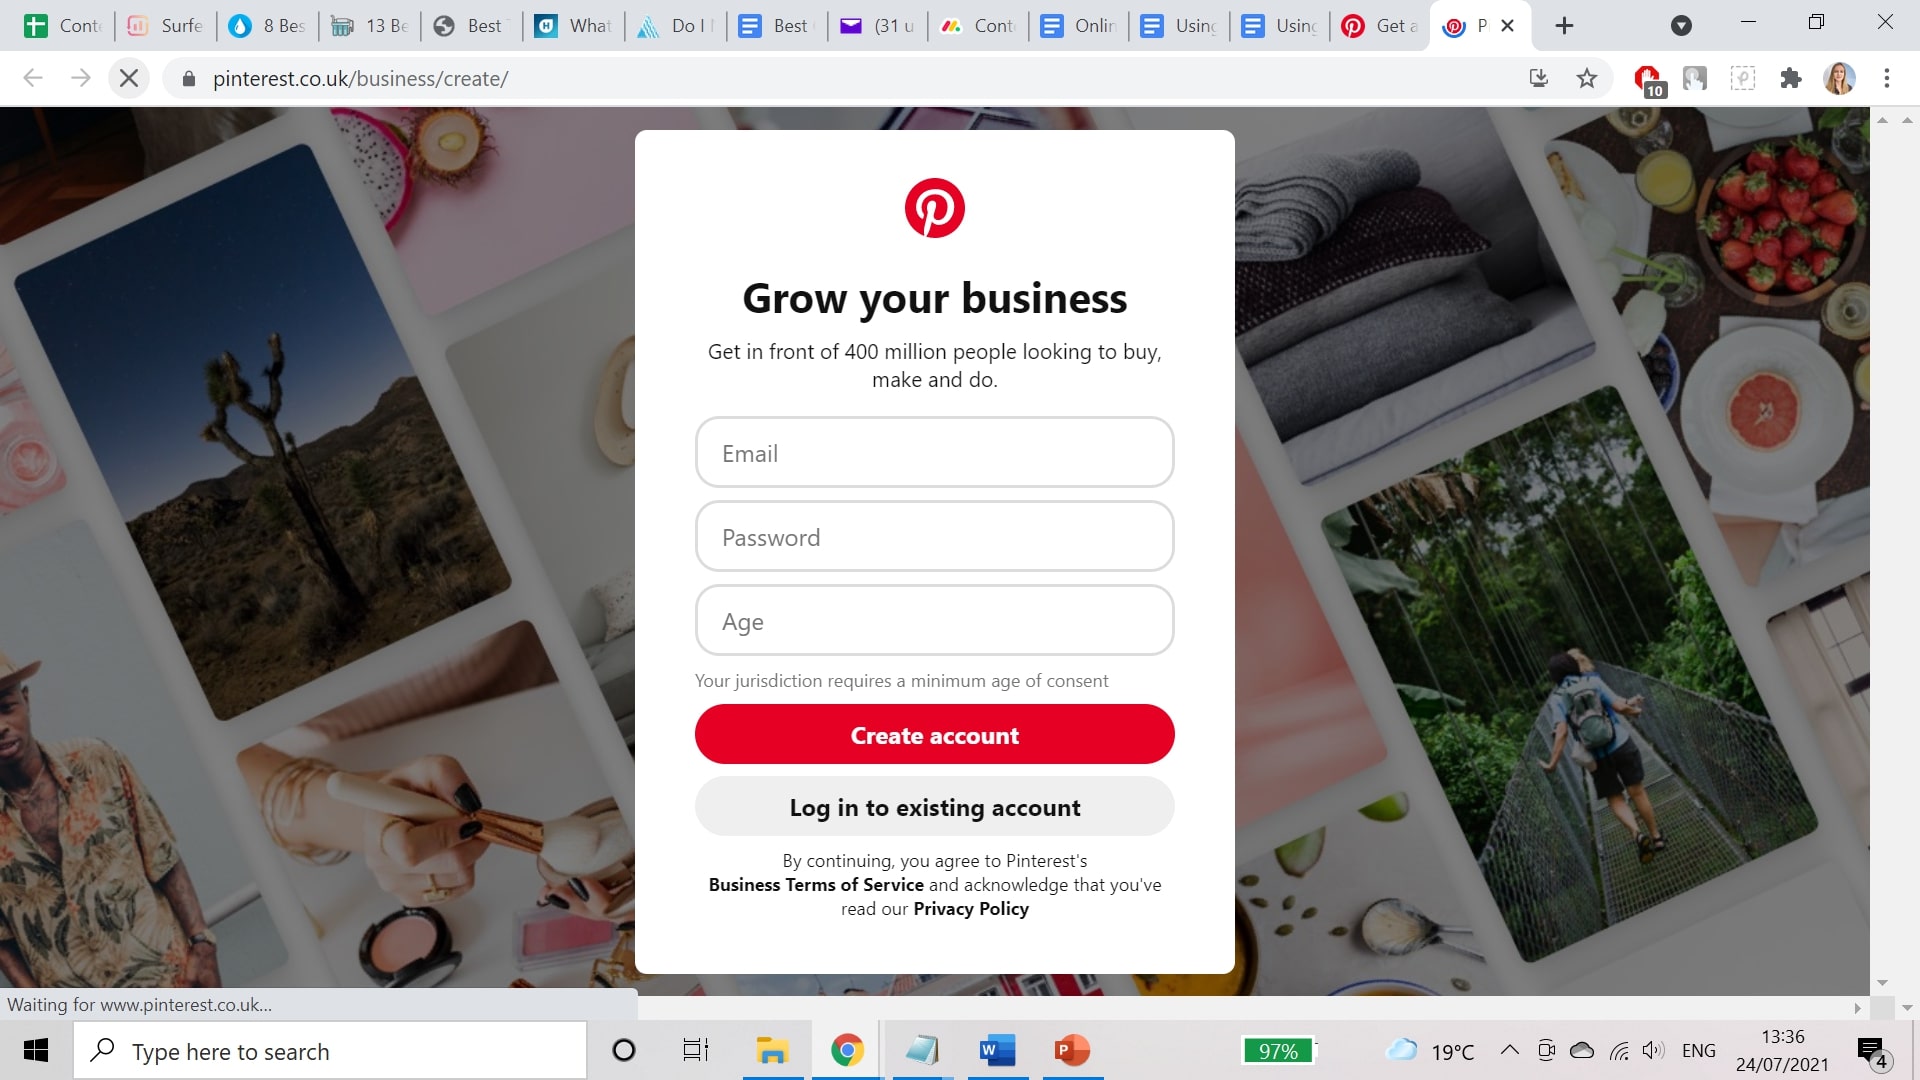 Create a Pinterest account for business purposes